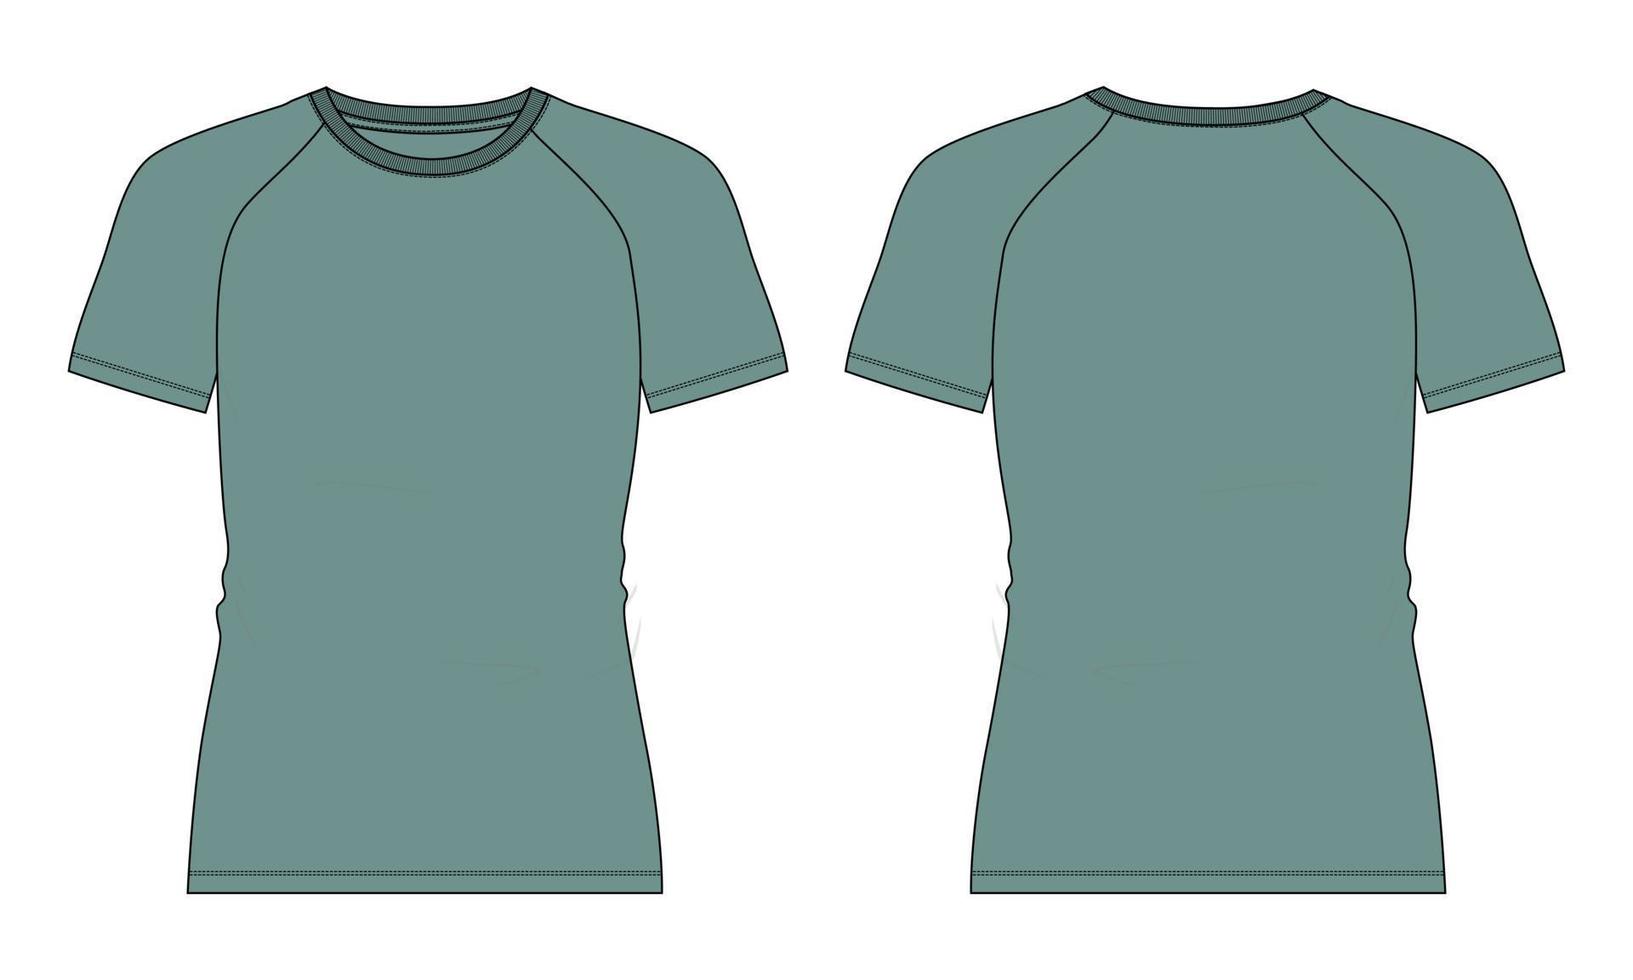 Slim fit Short  Sleeve raglan T shirt Technical Fashion flat sketch Vector Illustration Green Color template Front and back views isolated on white background.